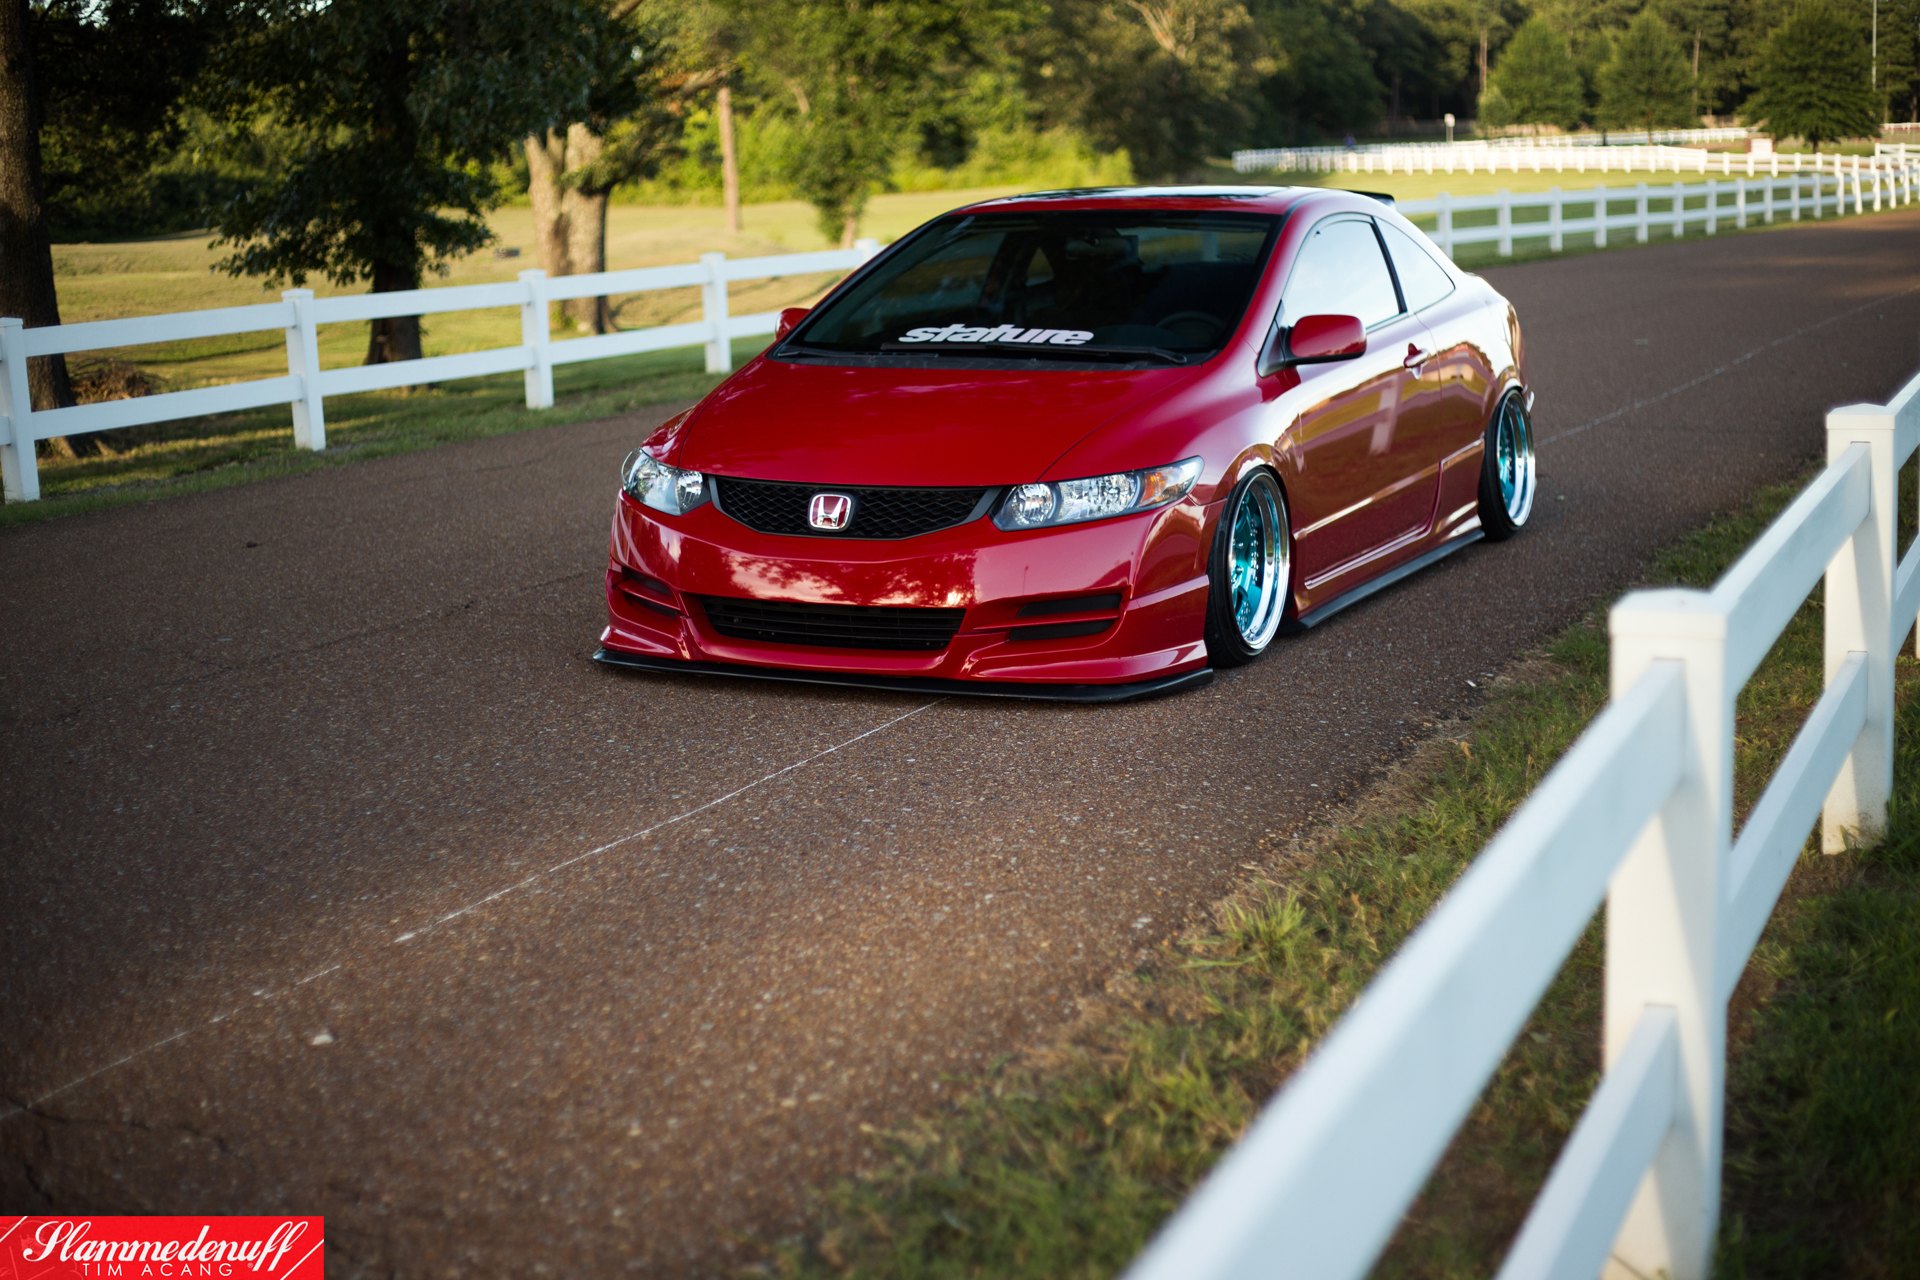 Aftermarket Headlights on Red Stanced Honda Civic - Photo by Avant Garde Wheels